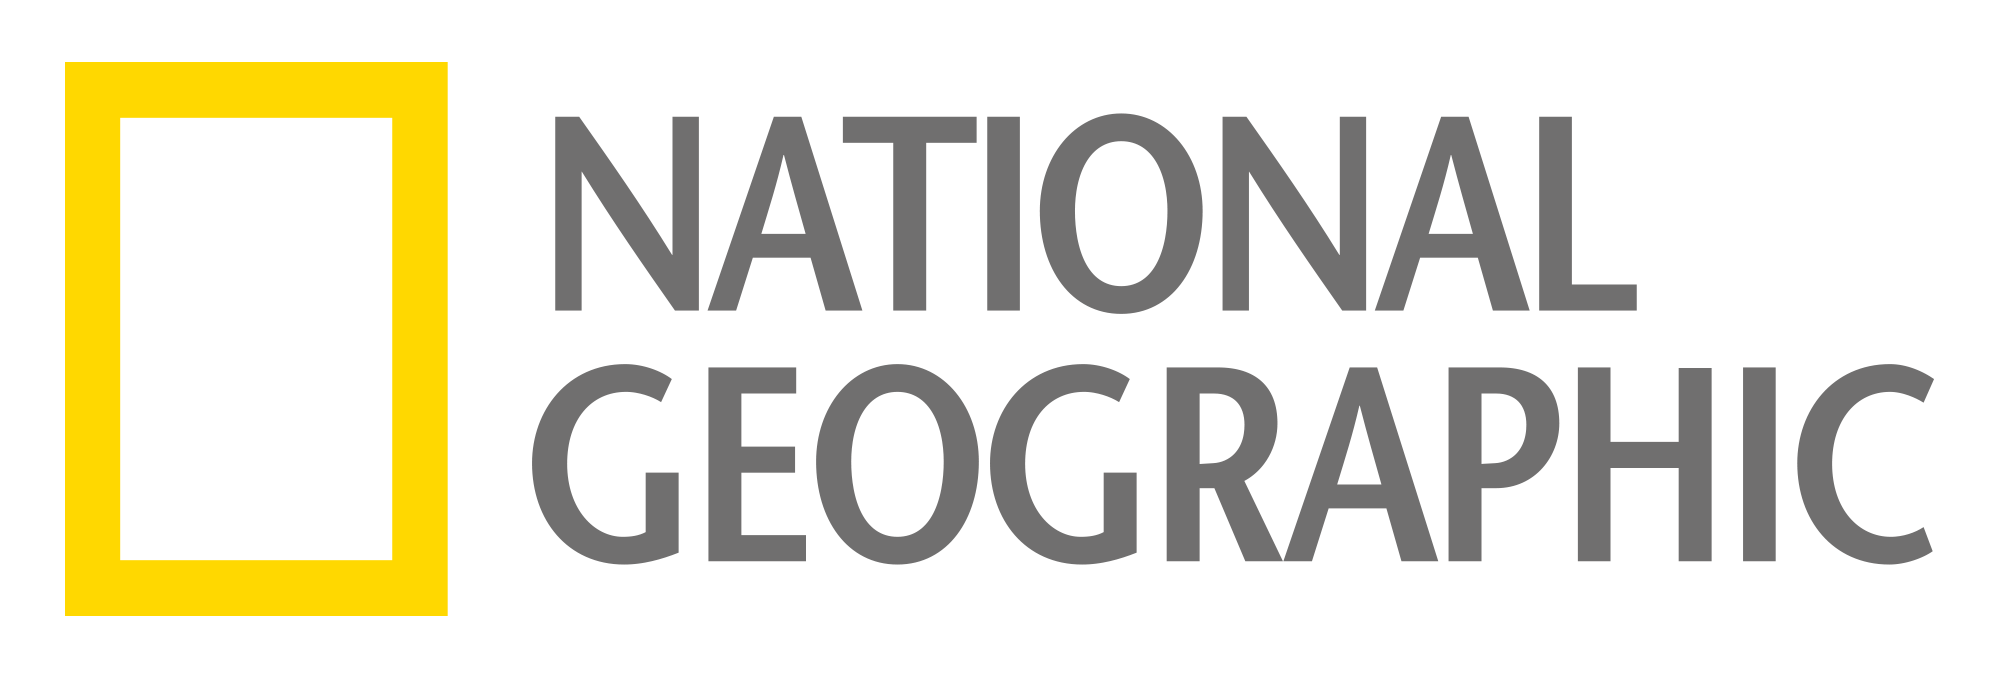 Ng_Logo_Gray.png - National Geographic Channel, Transparent background PNG HD thumbnail